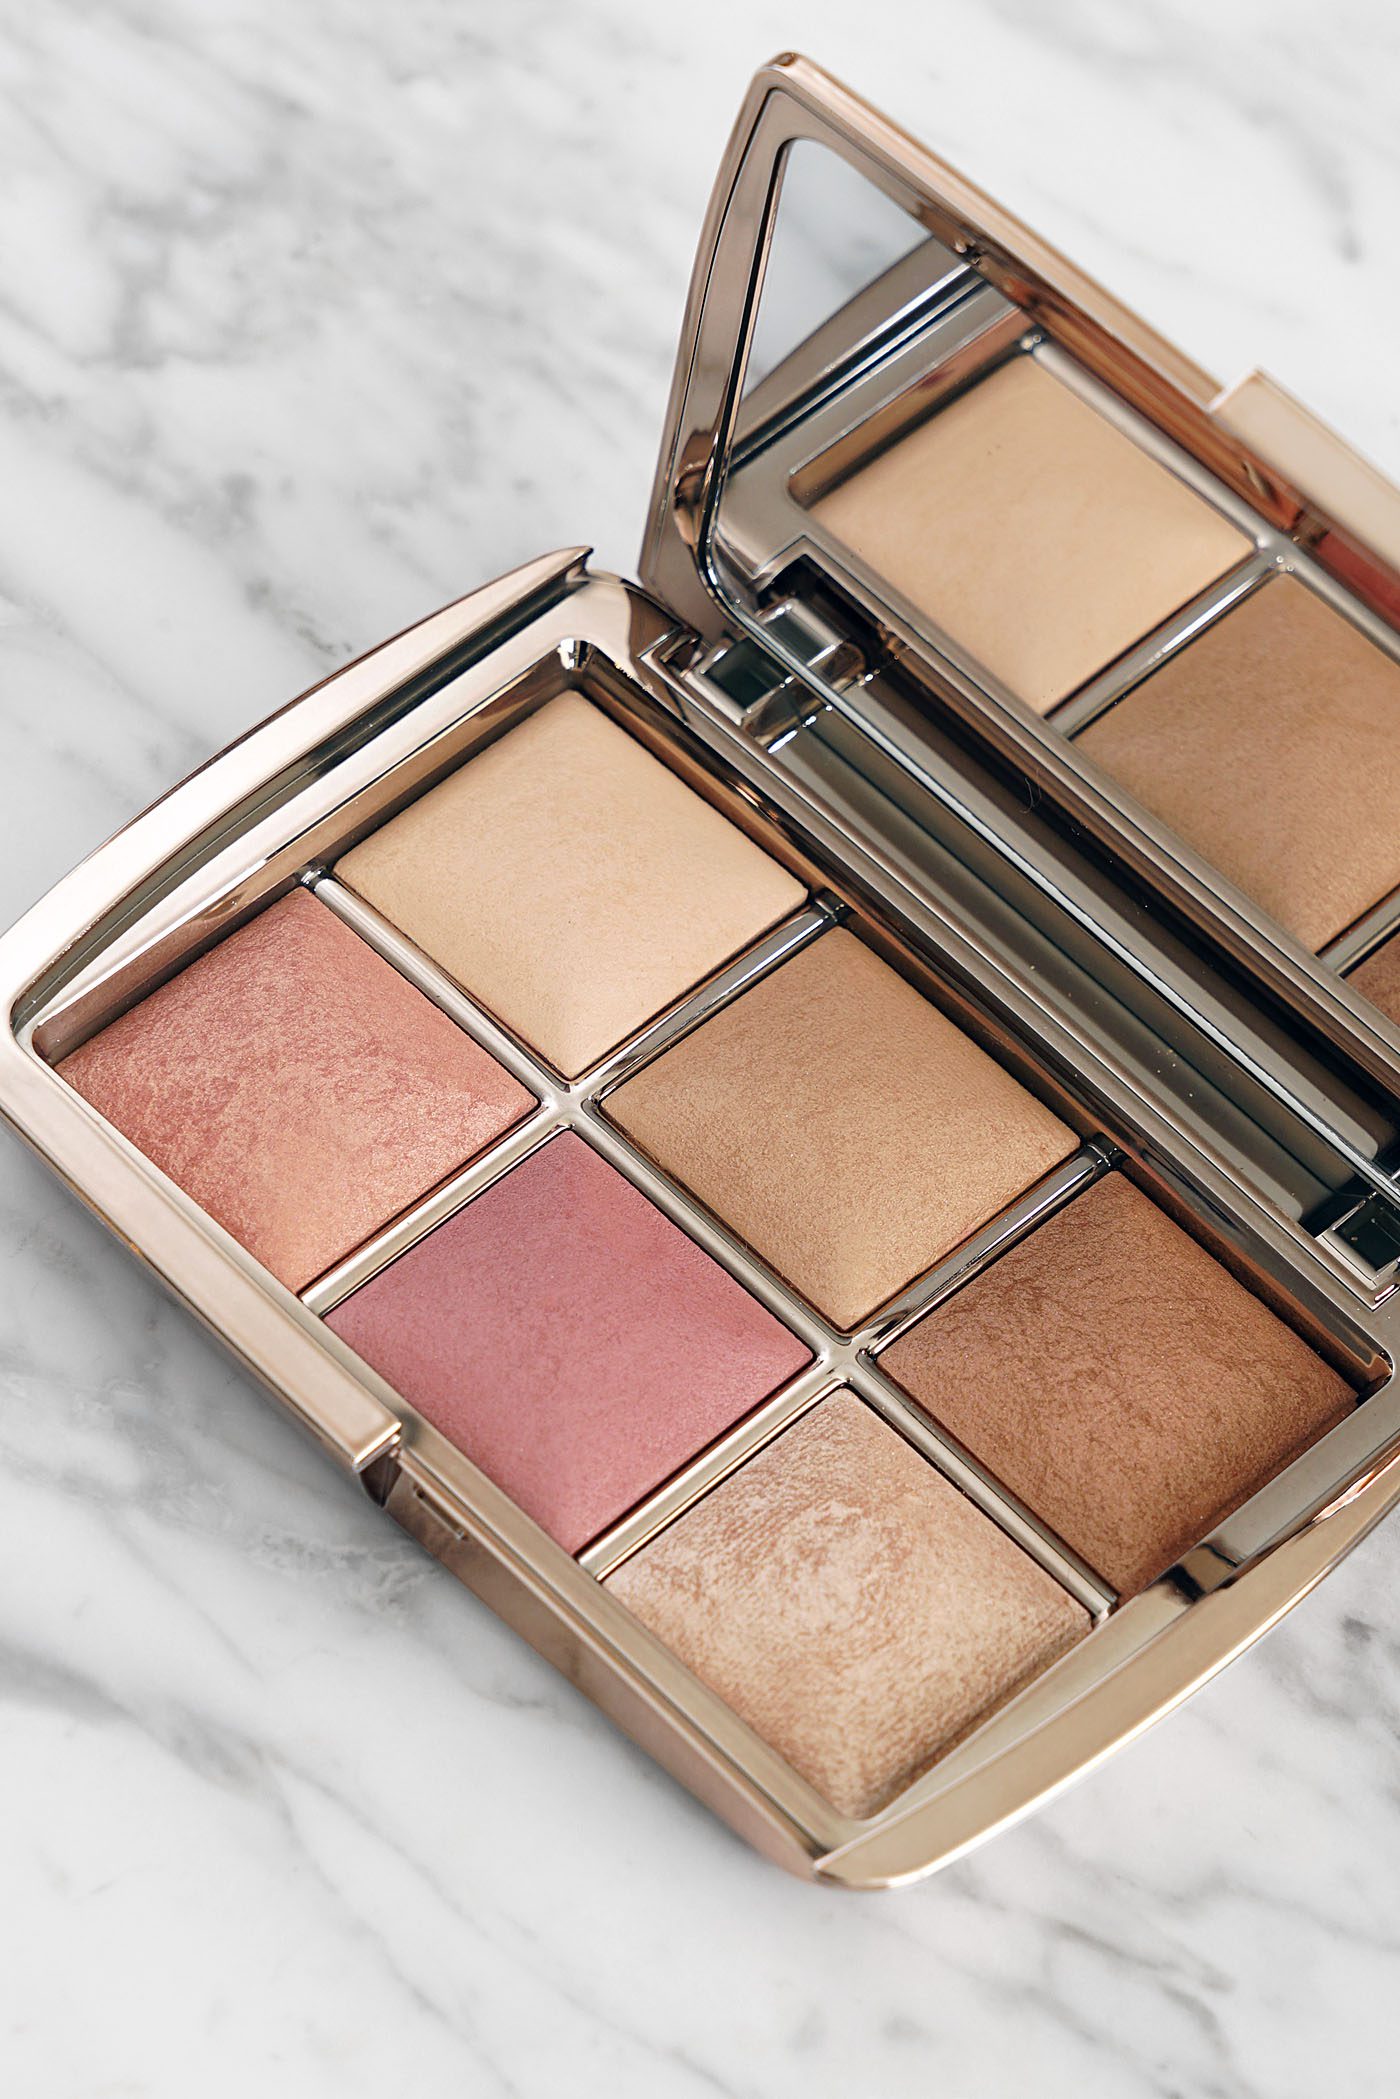 Hourglass Unlocked Ambient Lighting Palette Review